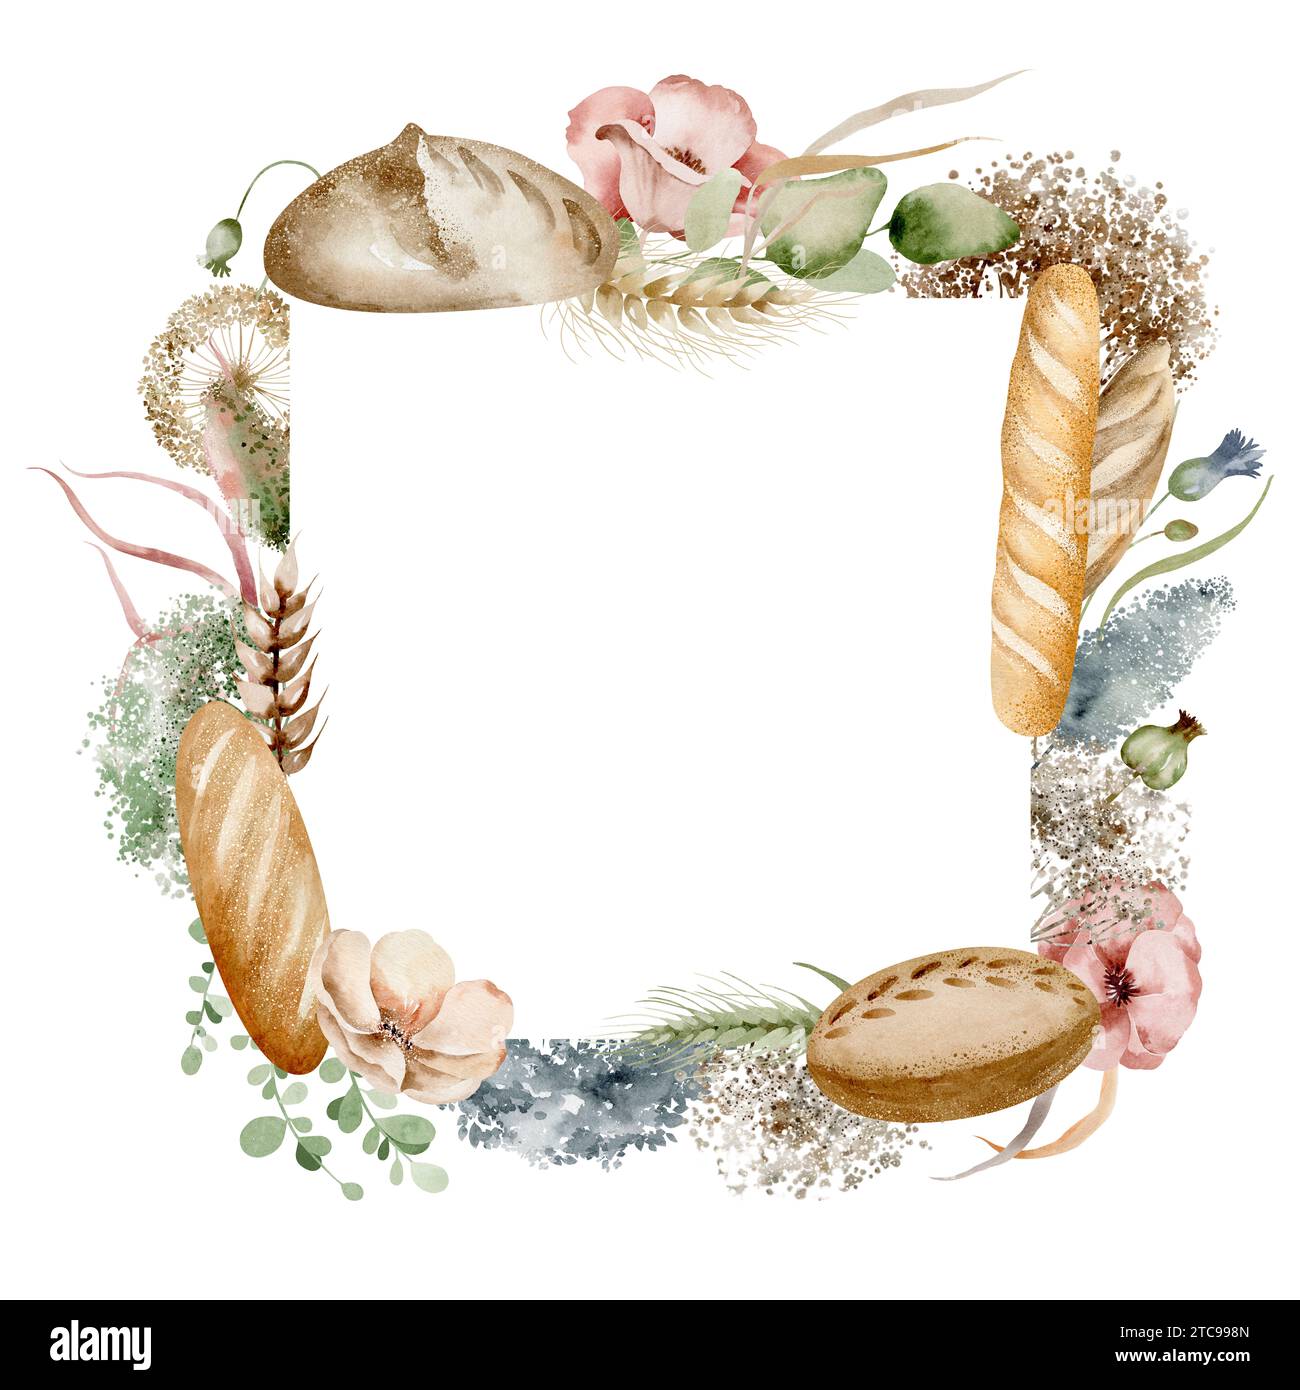 Bread baking frame template. Watercolor illustration of food and flowers on an isolated background. Cafeteria background and menu design. Stock Photo